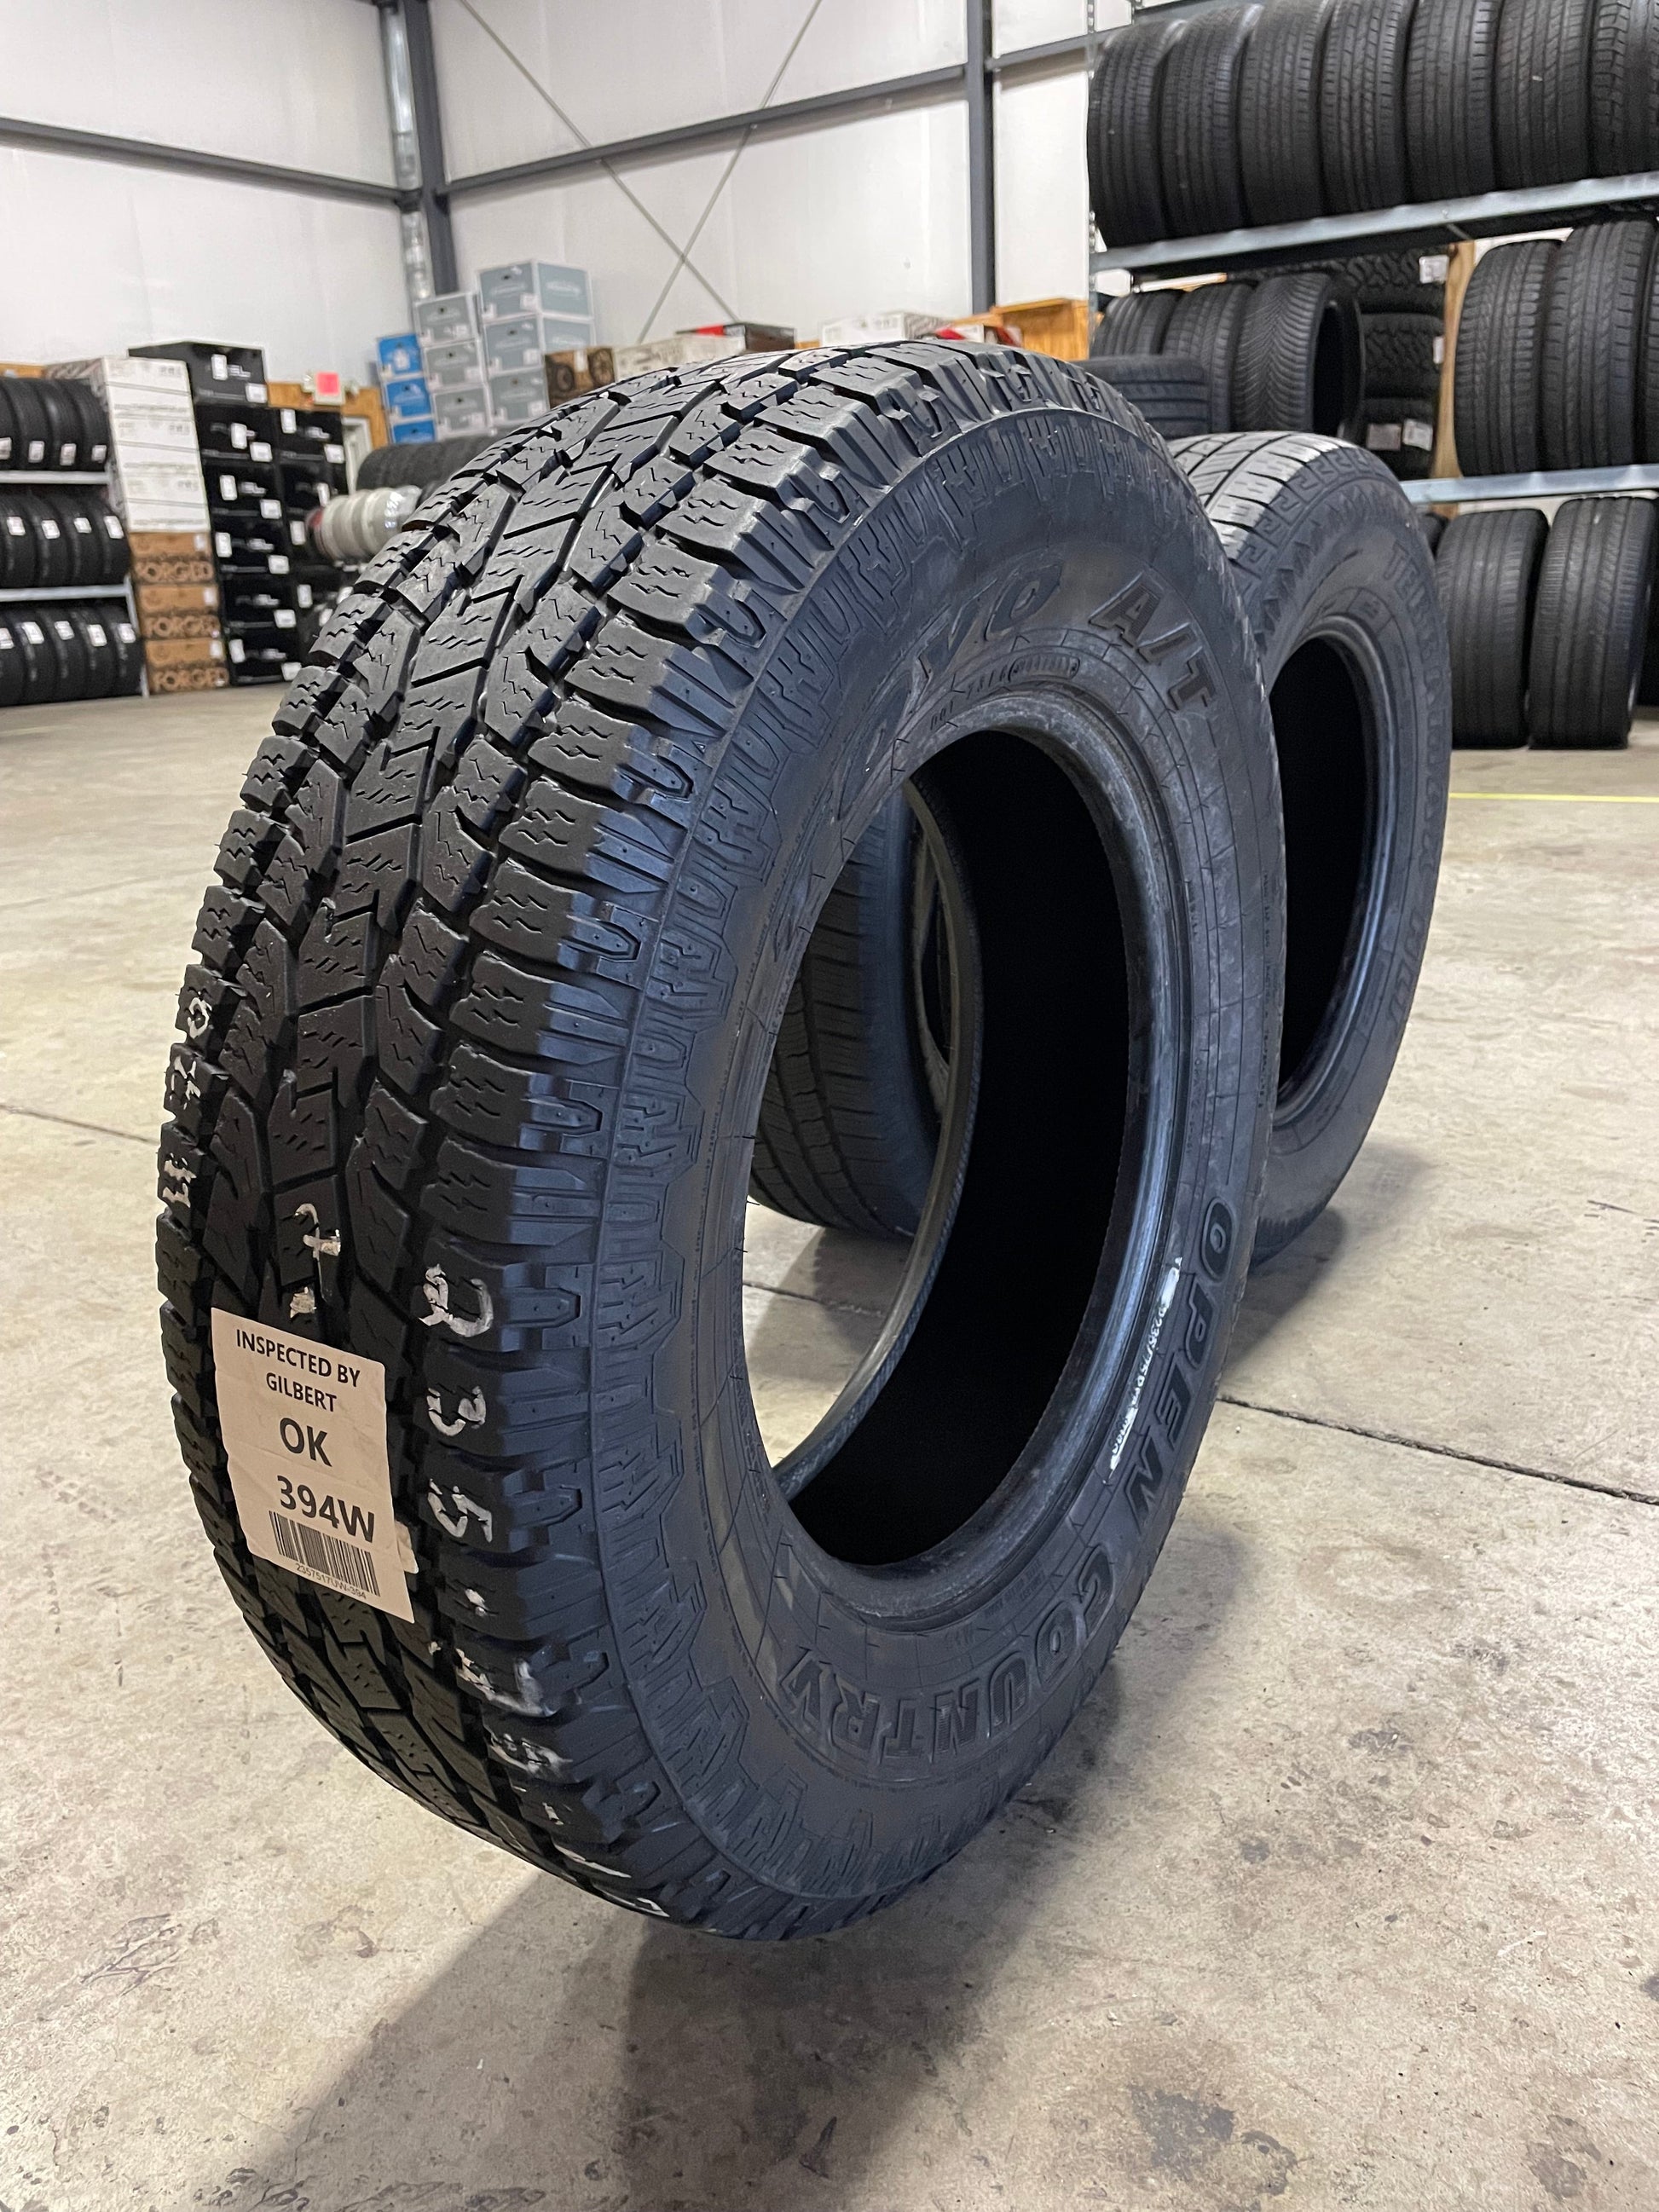 SINGLE 235/75R17 Toyo Open Country A/T 108S SL - Used Tires